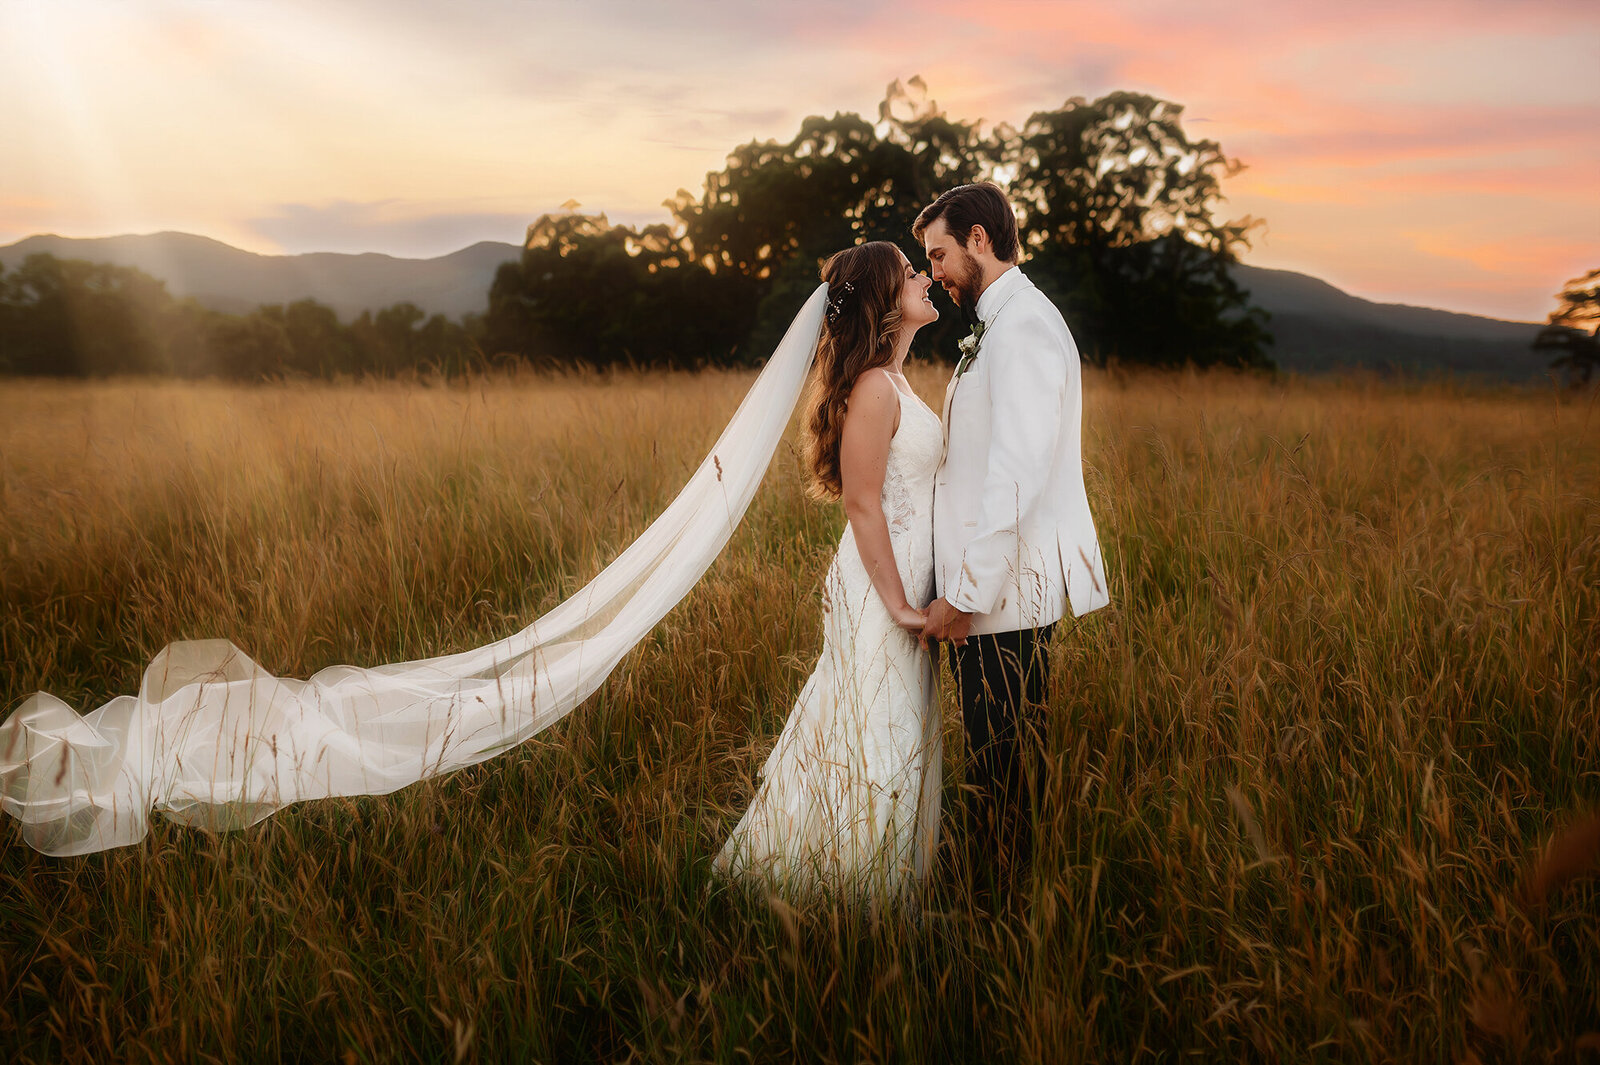 Bride and Groom embrace for Newlywed Portraits after their Micro Wedding Ceremony in Asheville, NC.